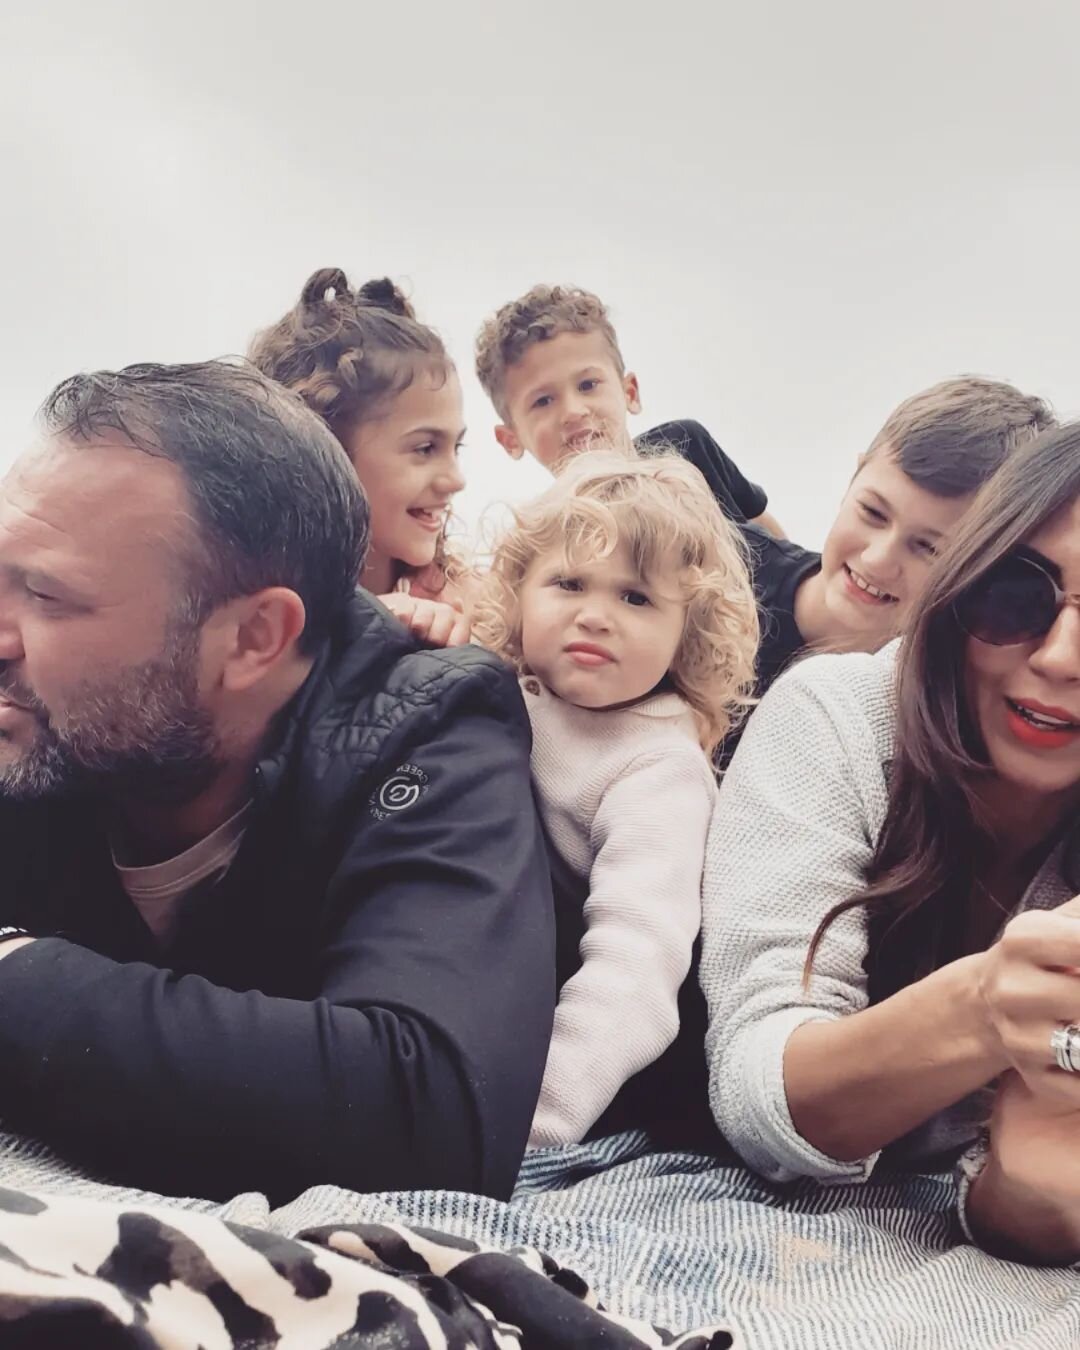 Looking back at some of our photos from the Bank Holiday weekend when we went down to Plymouth. This has to be one of my favourite photos...capturing the moments where noone is ready but everyone is together ❤ 

#family #love #friends #happy #instago